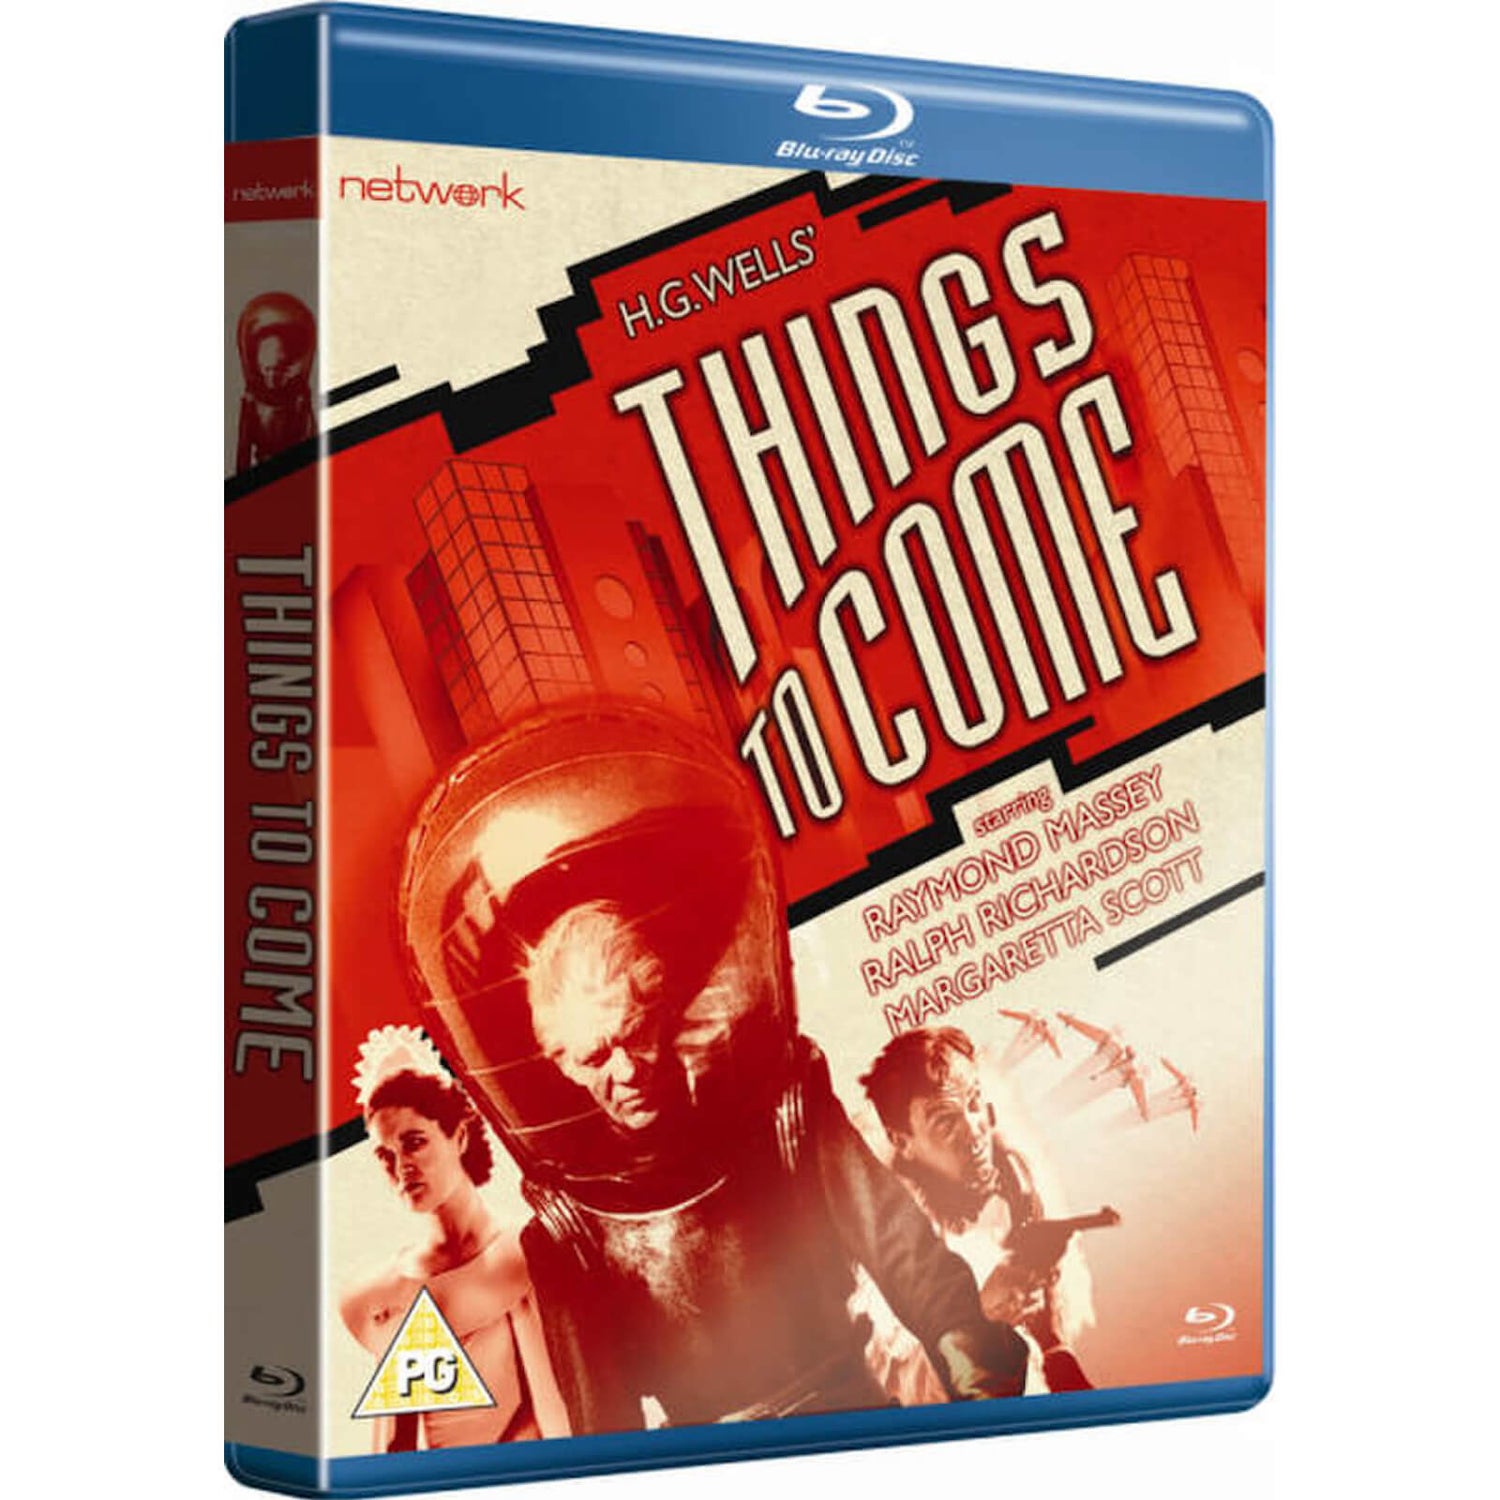 Things To Come Blu-ray+DVD